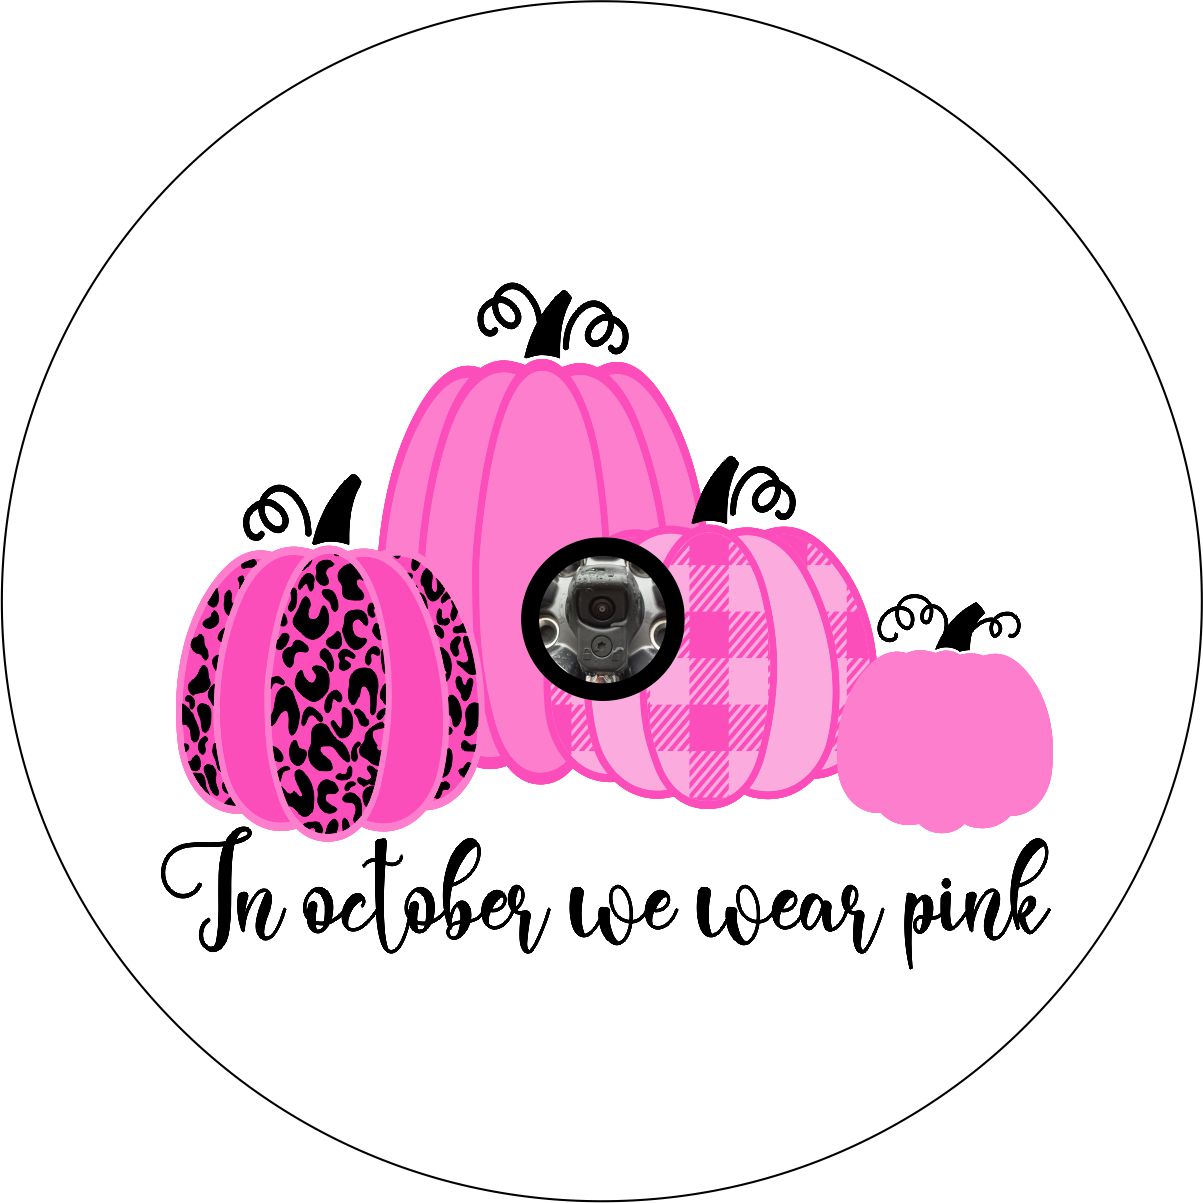 Spare tire cover with camera hole of four pink pumpkins designed with the saying in October we wear pink spare tire cover on white vinyl for Jeep, RV, Camper, Bronco and more